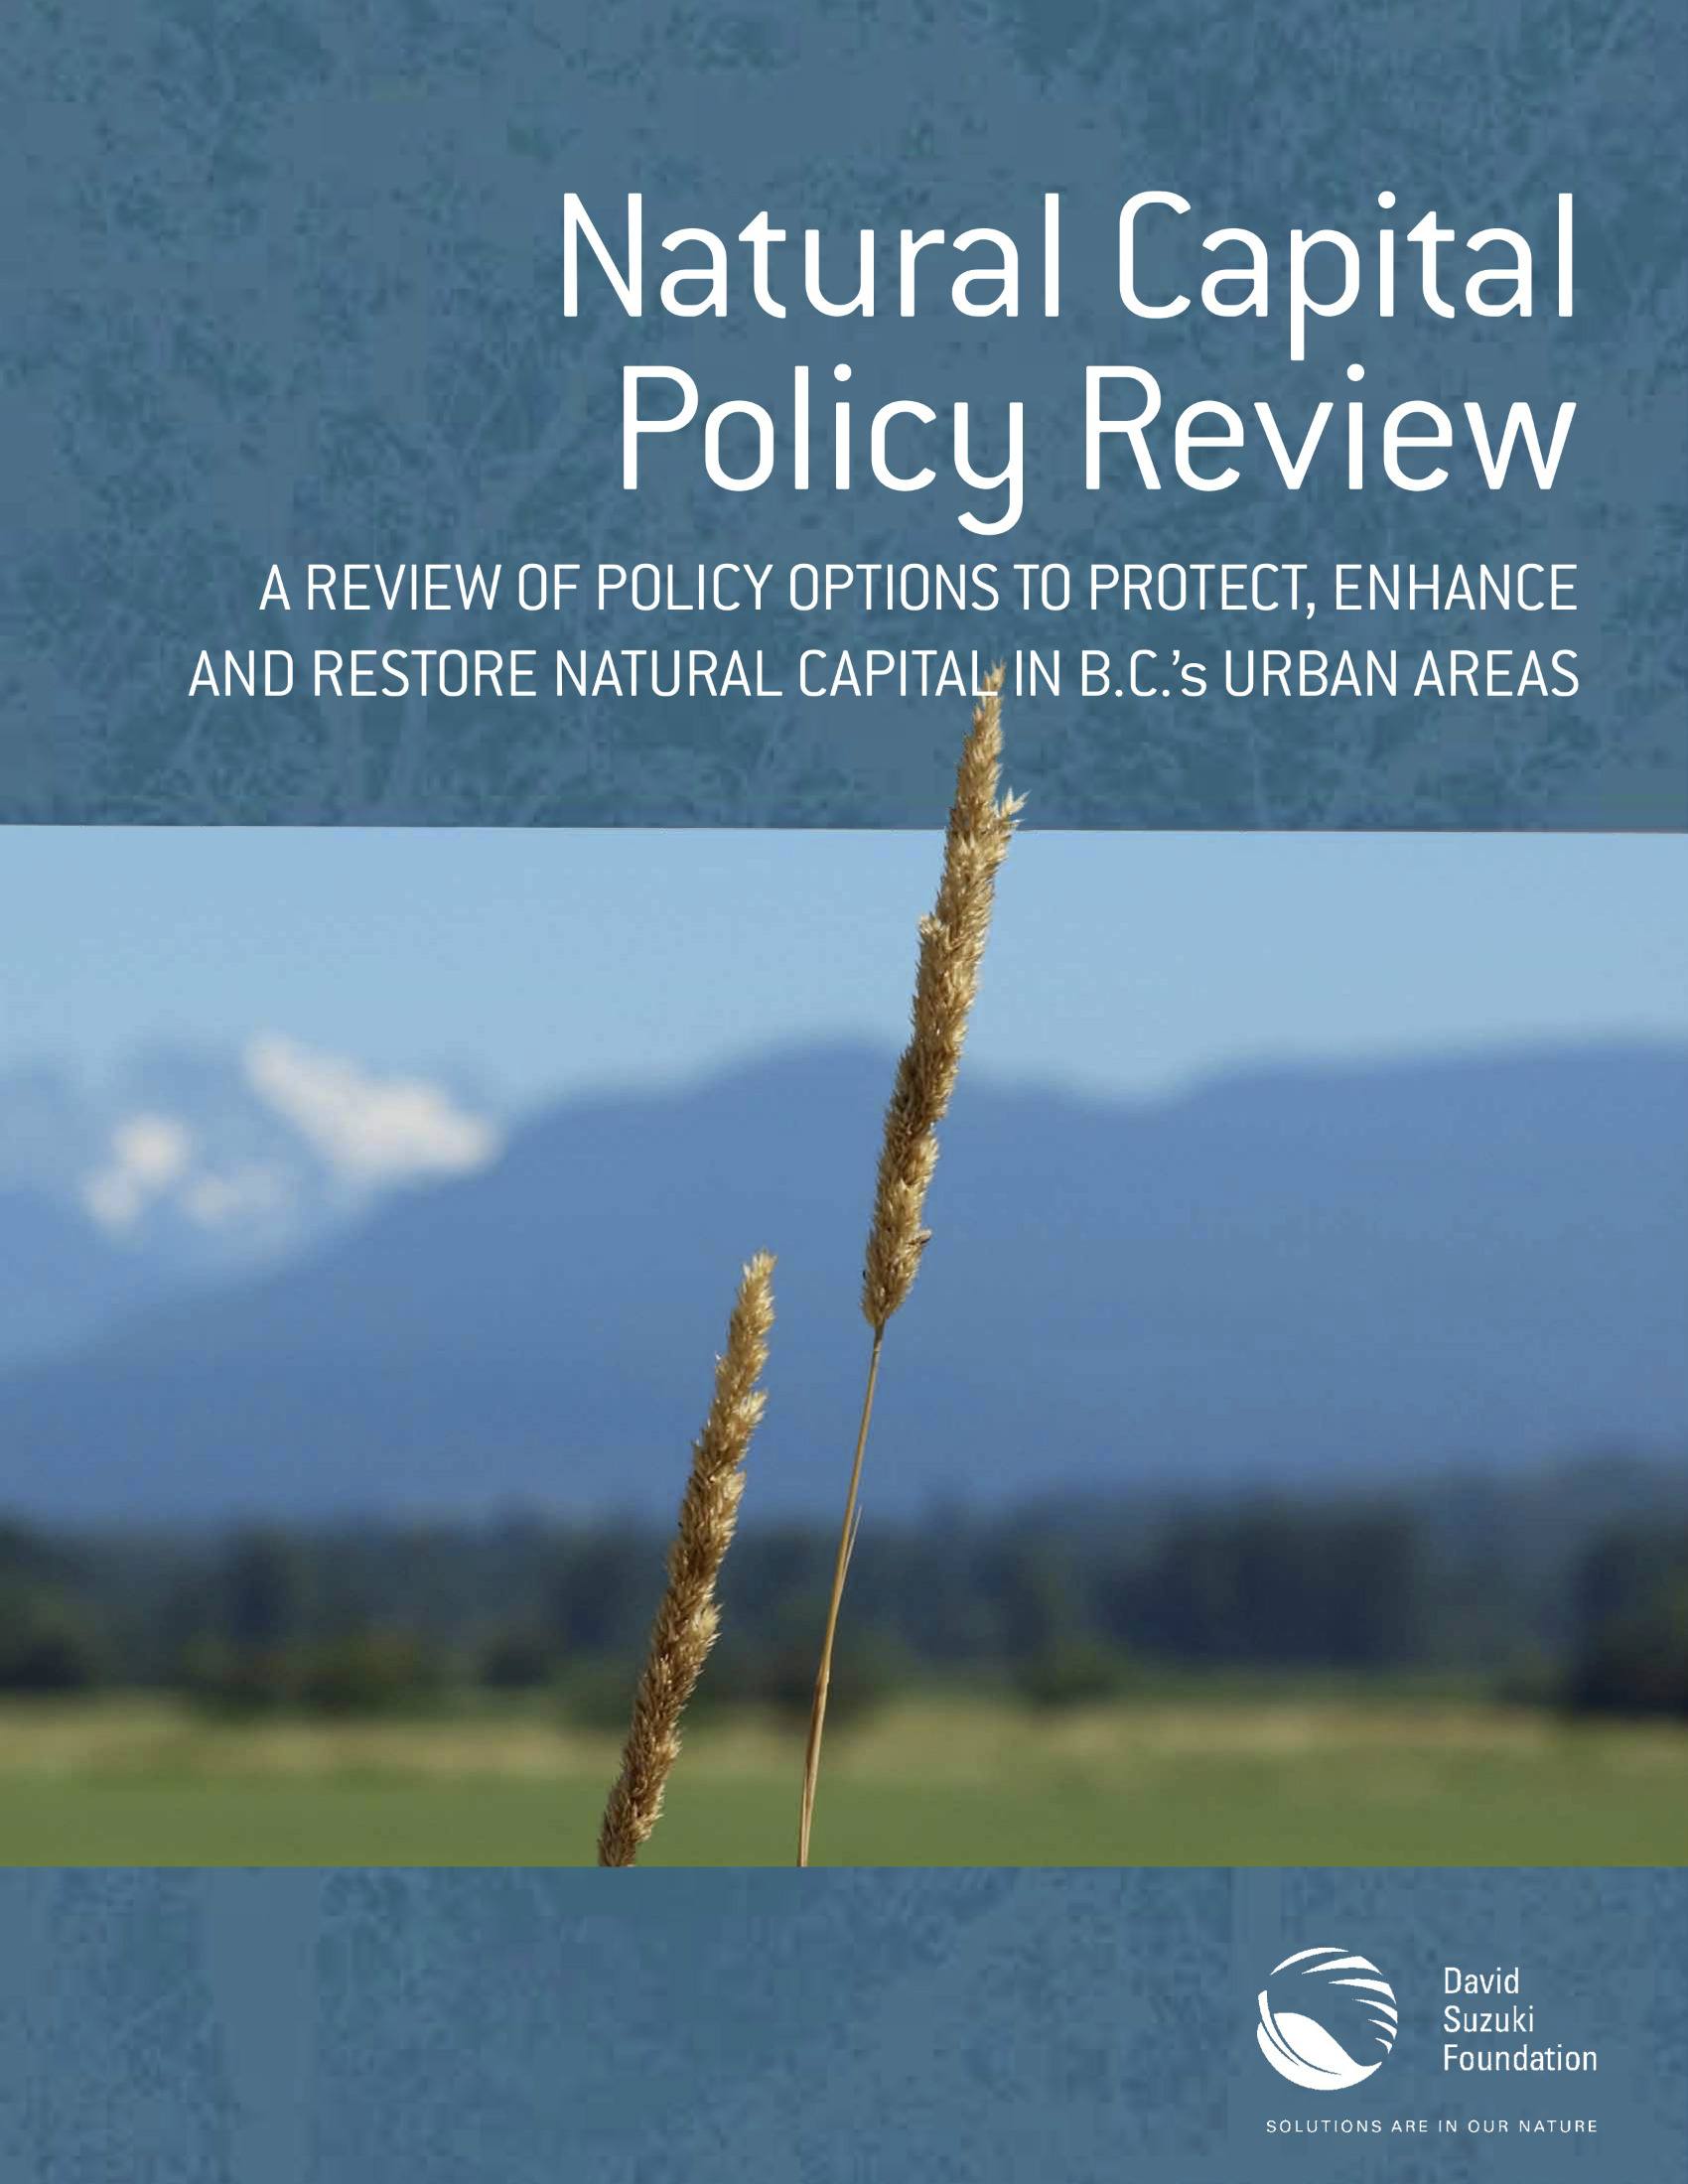 Natural Capital Policy Review: A Review of Policy Options to Protect, Enhance and Restore Natural Capital in B.C.'s Urban Areas